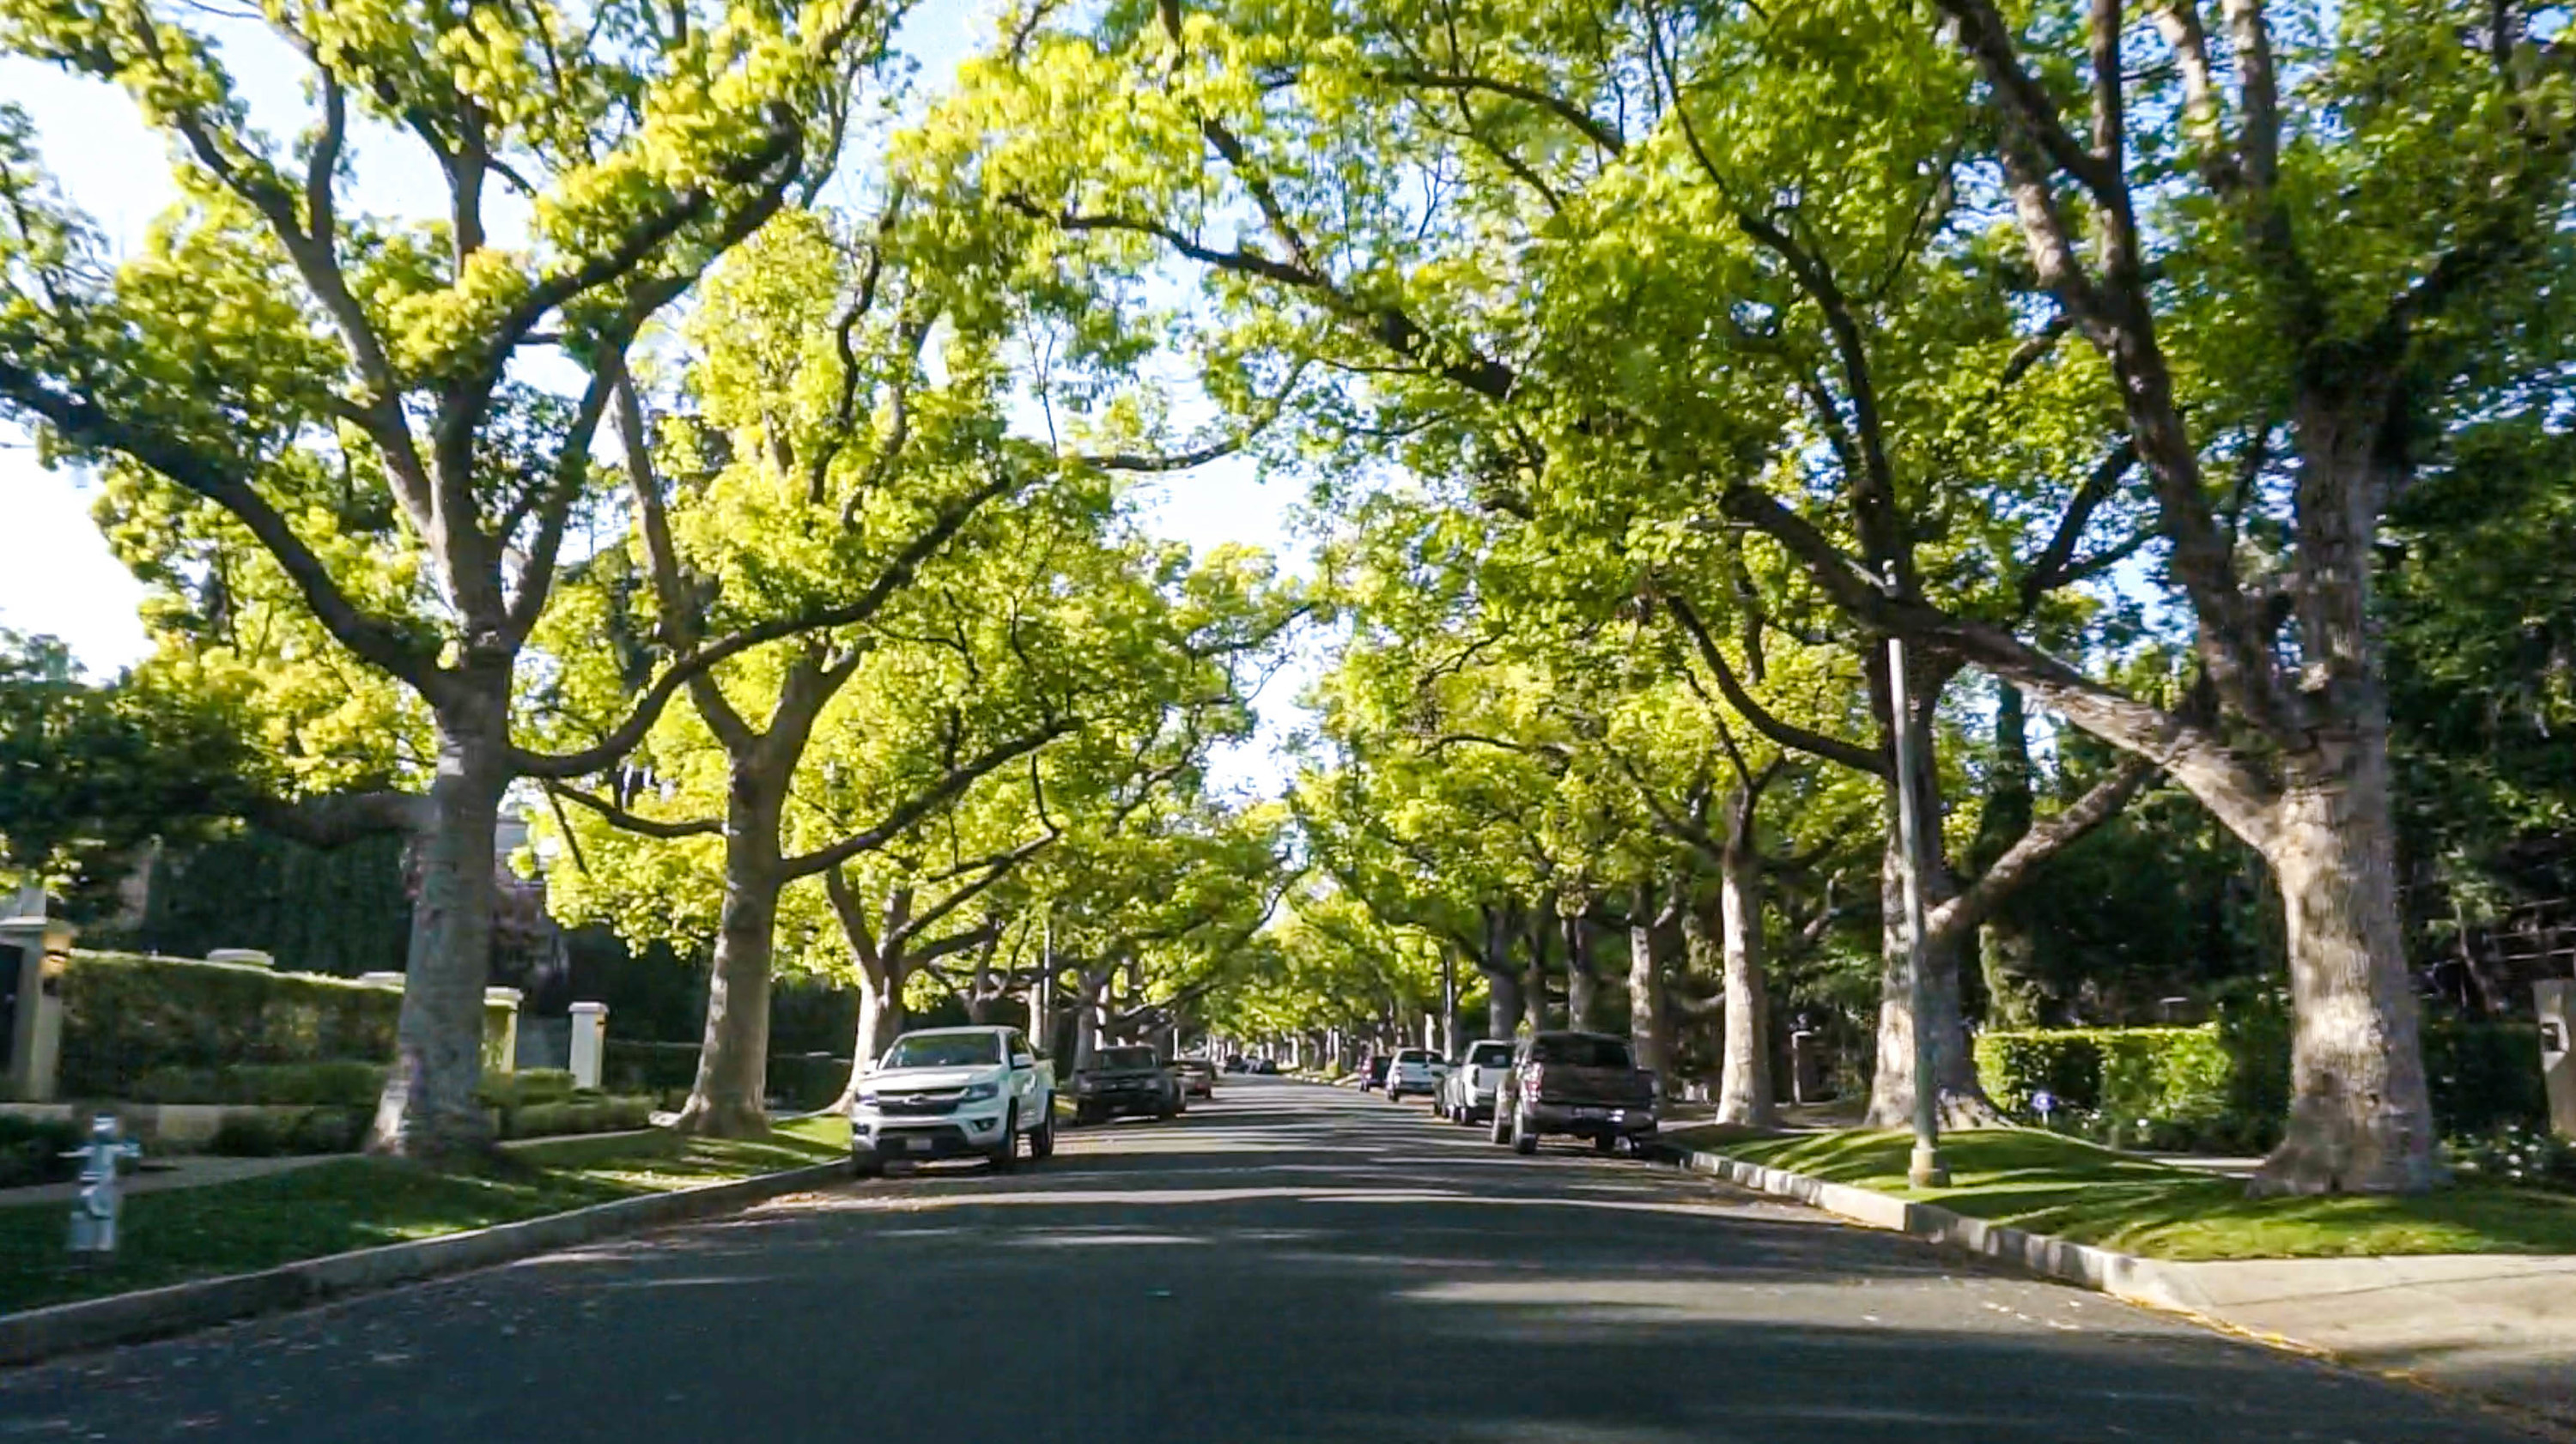 Maple trees line a residential street